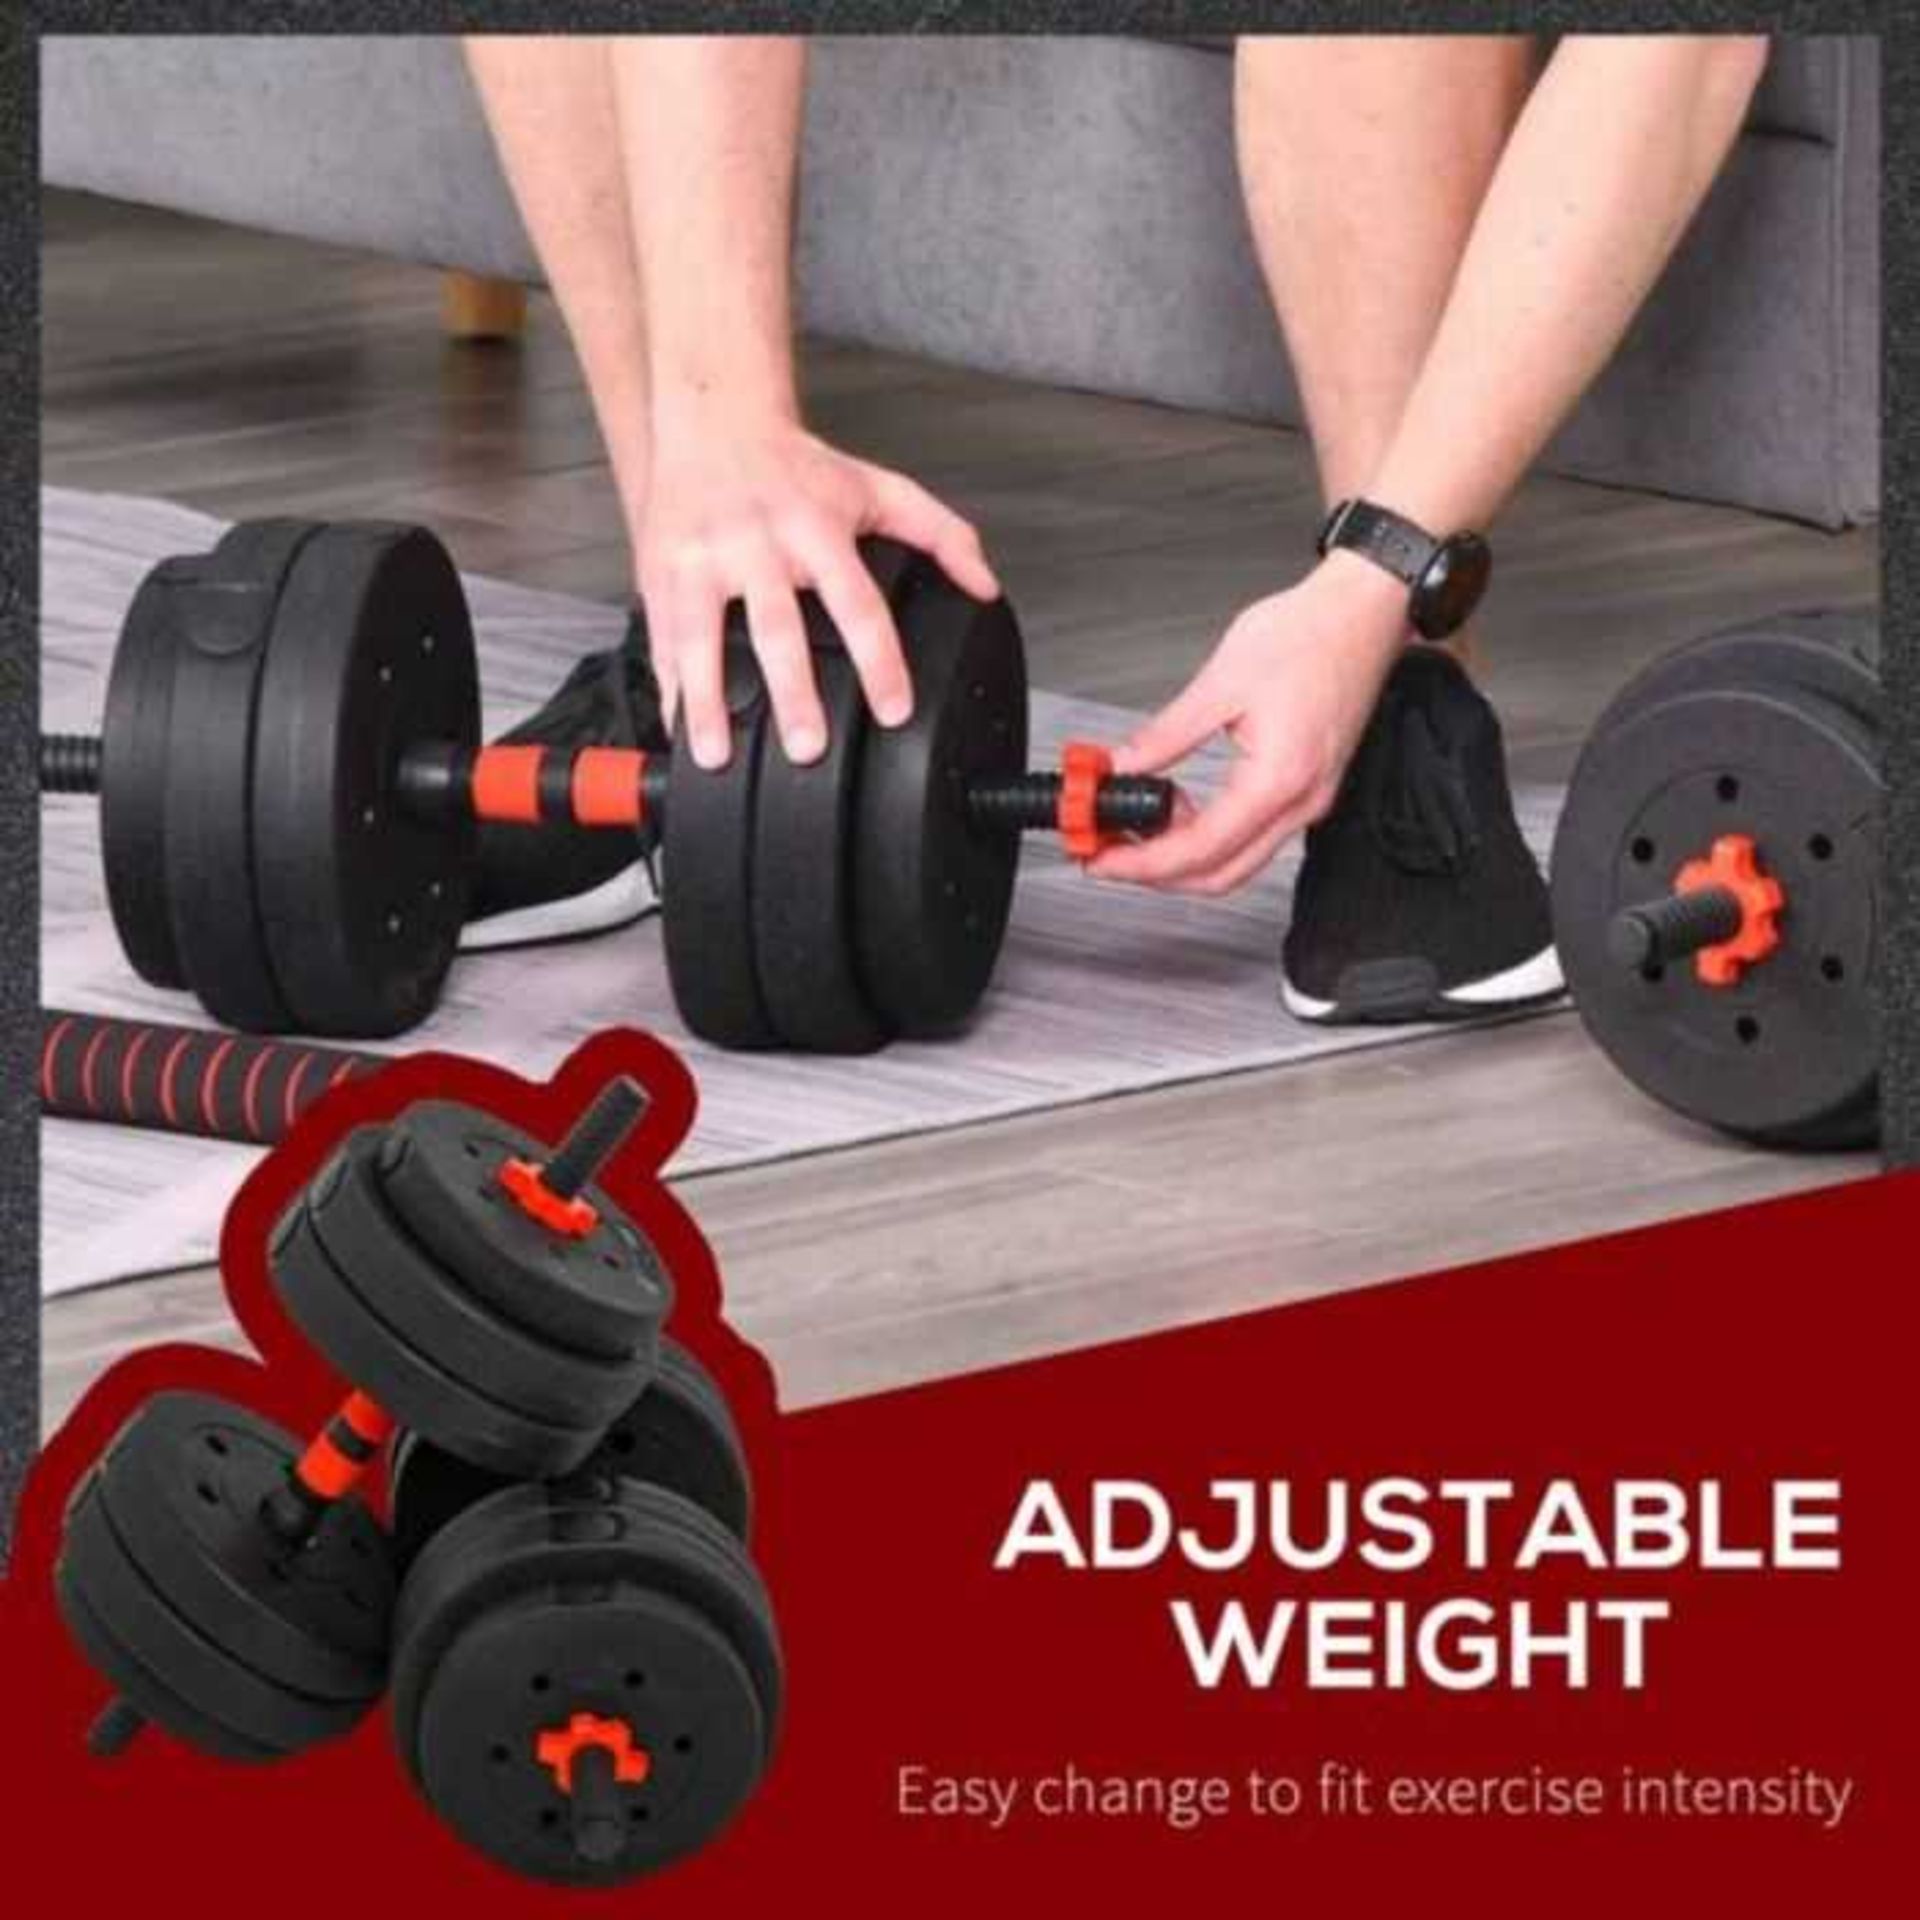 VAT 1x Movtotop 30KG adjustable Dumb Bell weight set, new and boxed, we can only find these in - Image 3 of 4